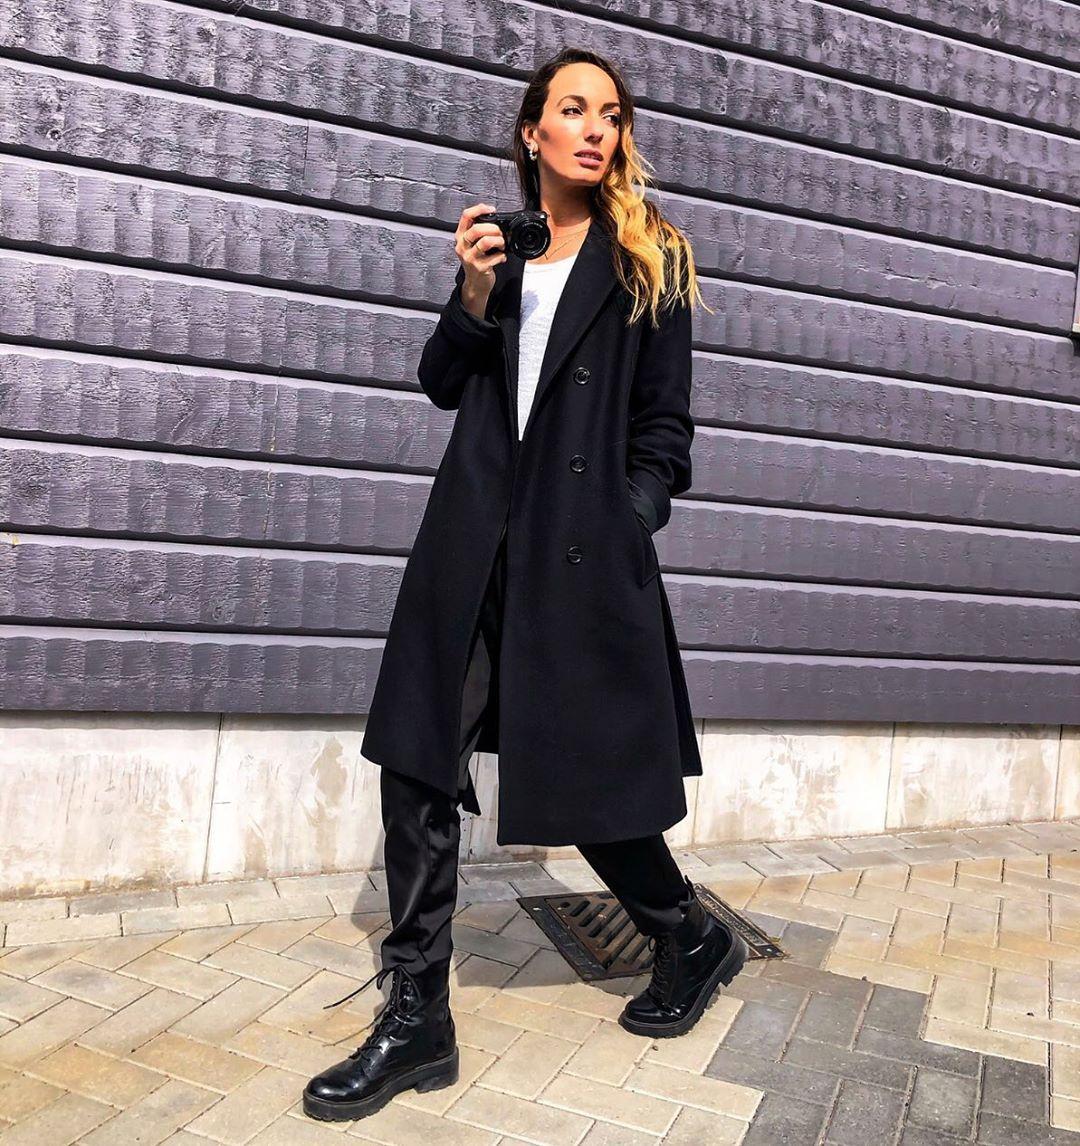 51 Hot Pictures Of Kosovare Asllani Are Simply Excessively Damn Delectable 5